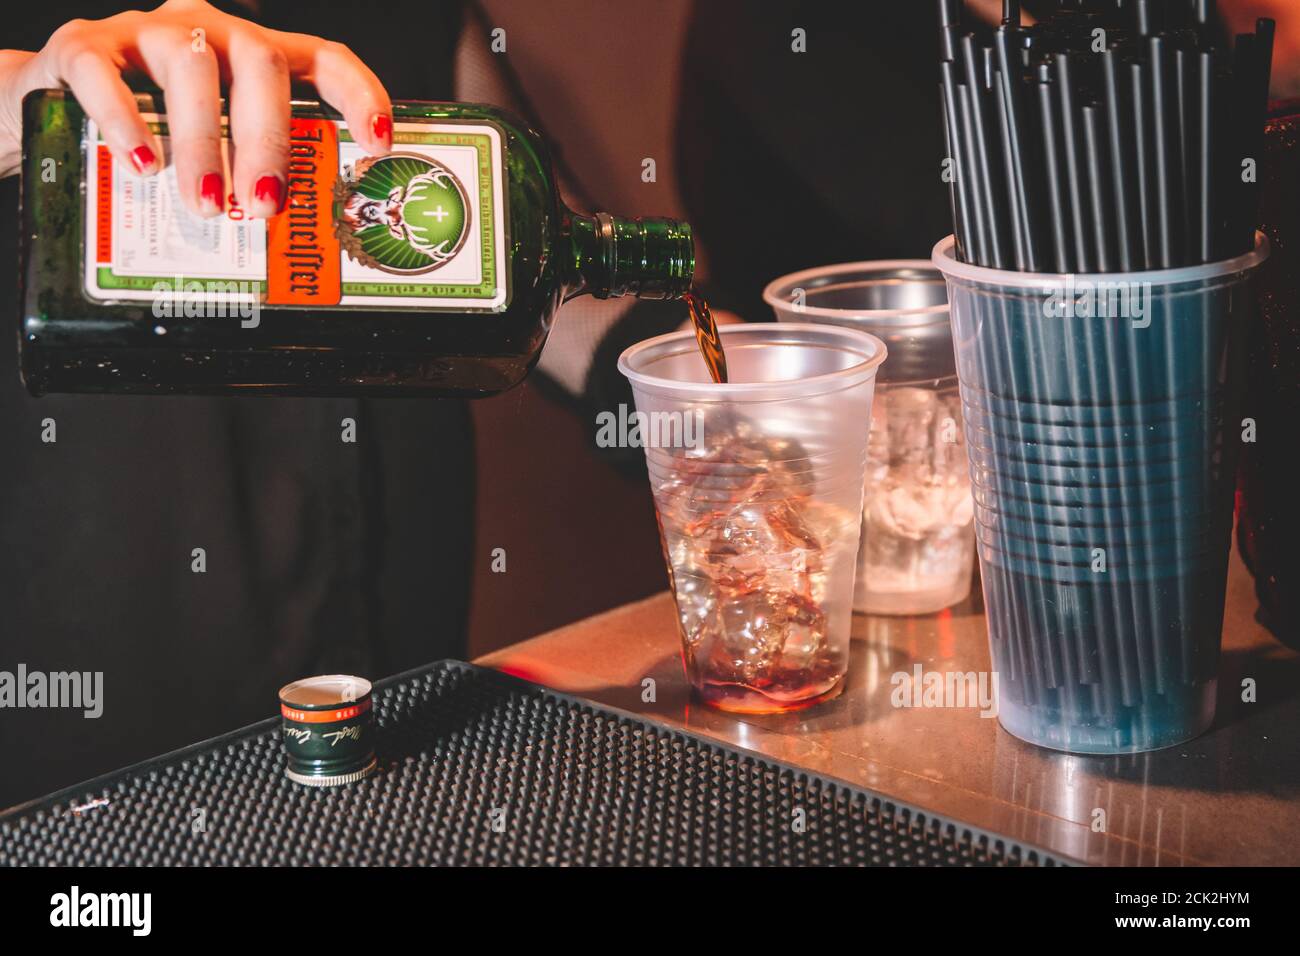 Buenos Aires, Argentina; January 7, 2018: Woman serving Jagermeister in a plastic cup with ice. Stock Photo